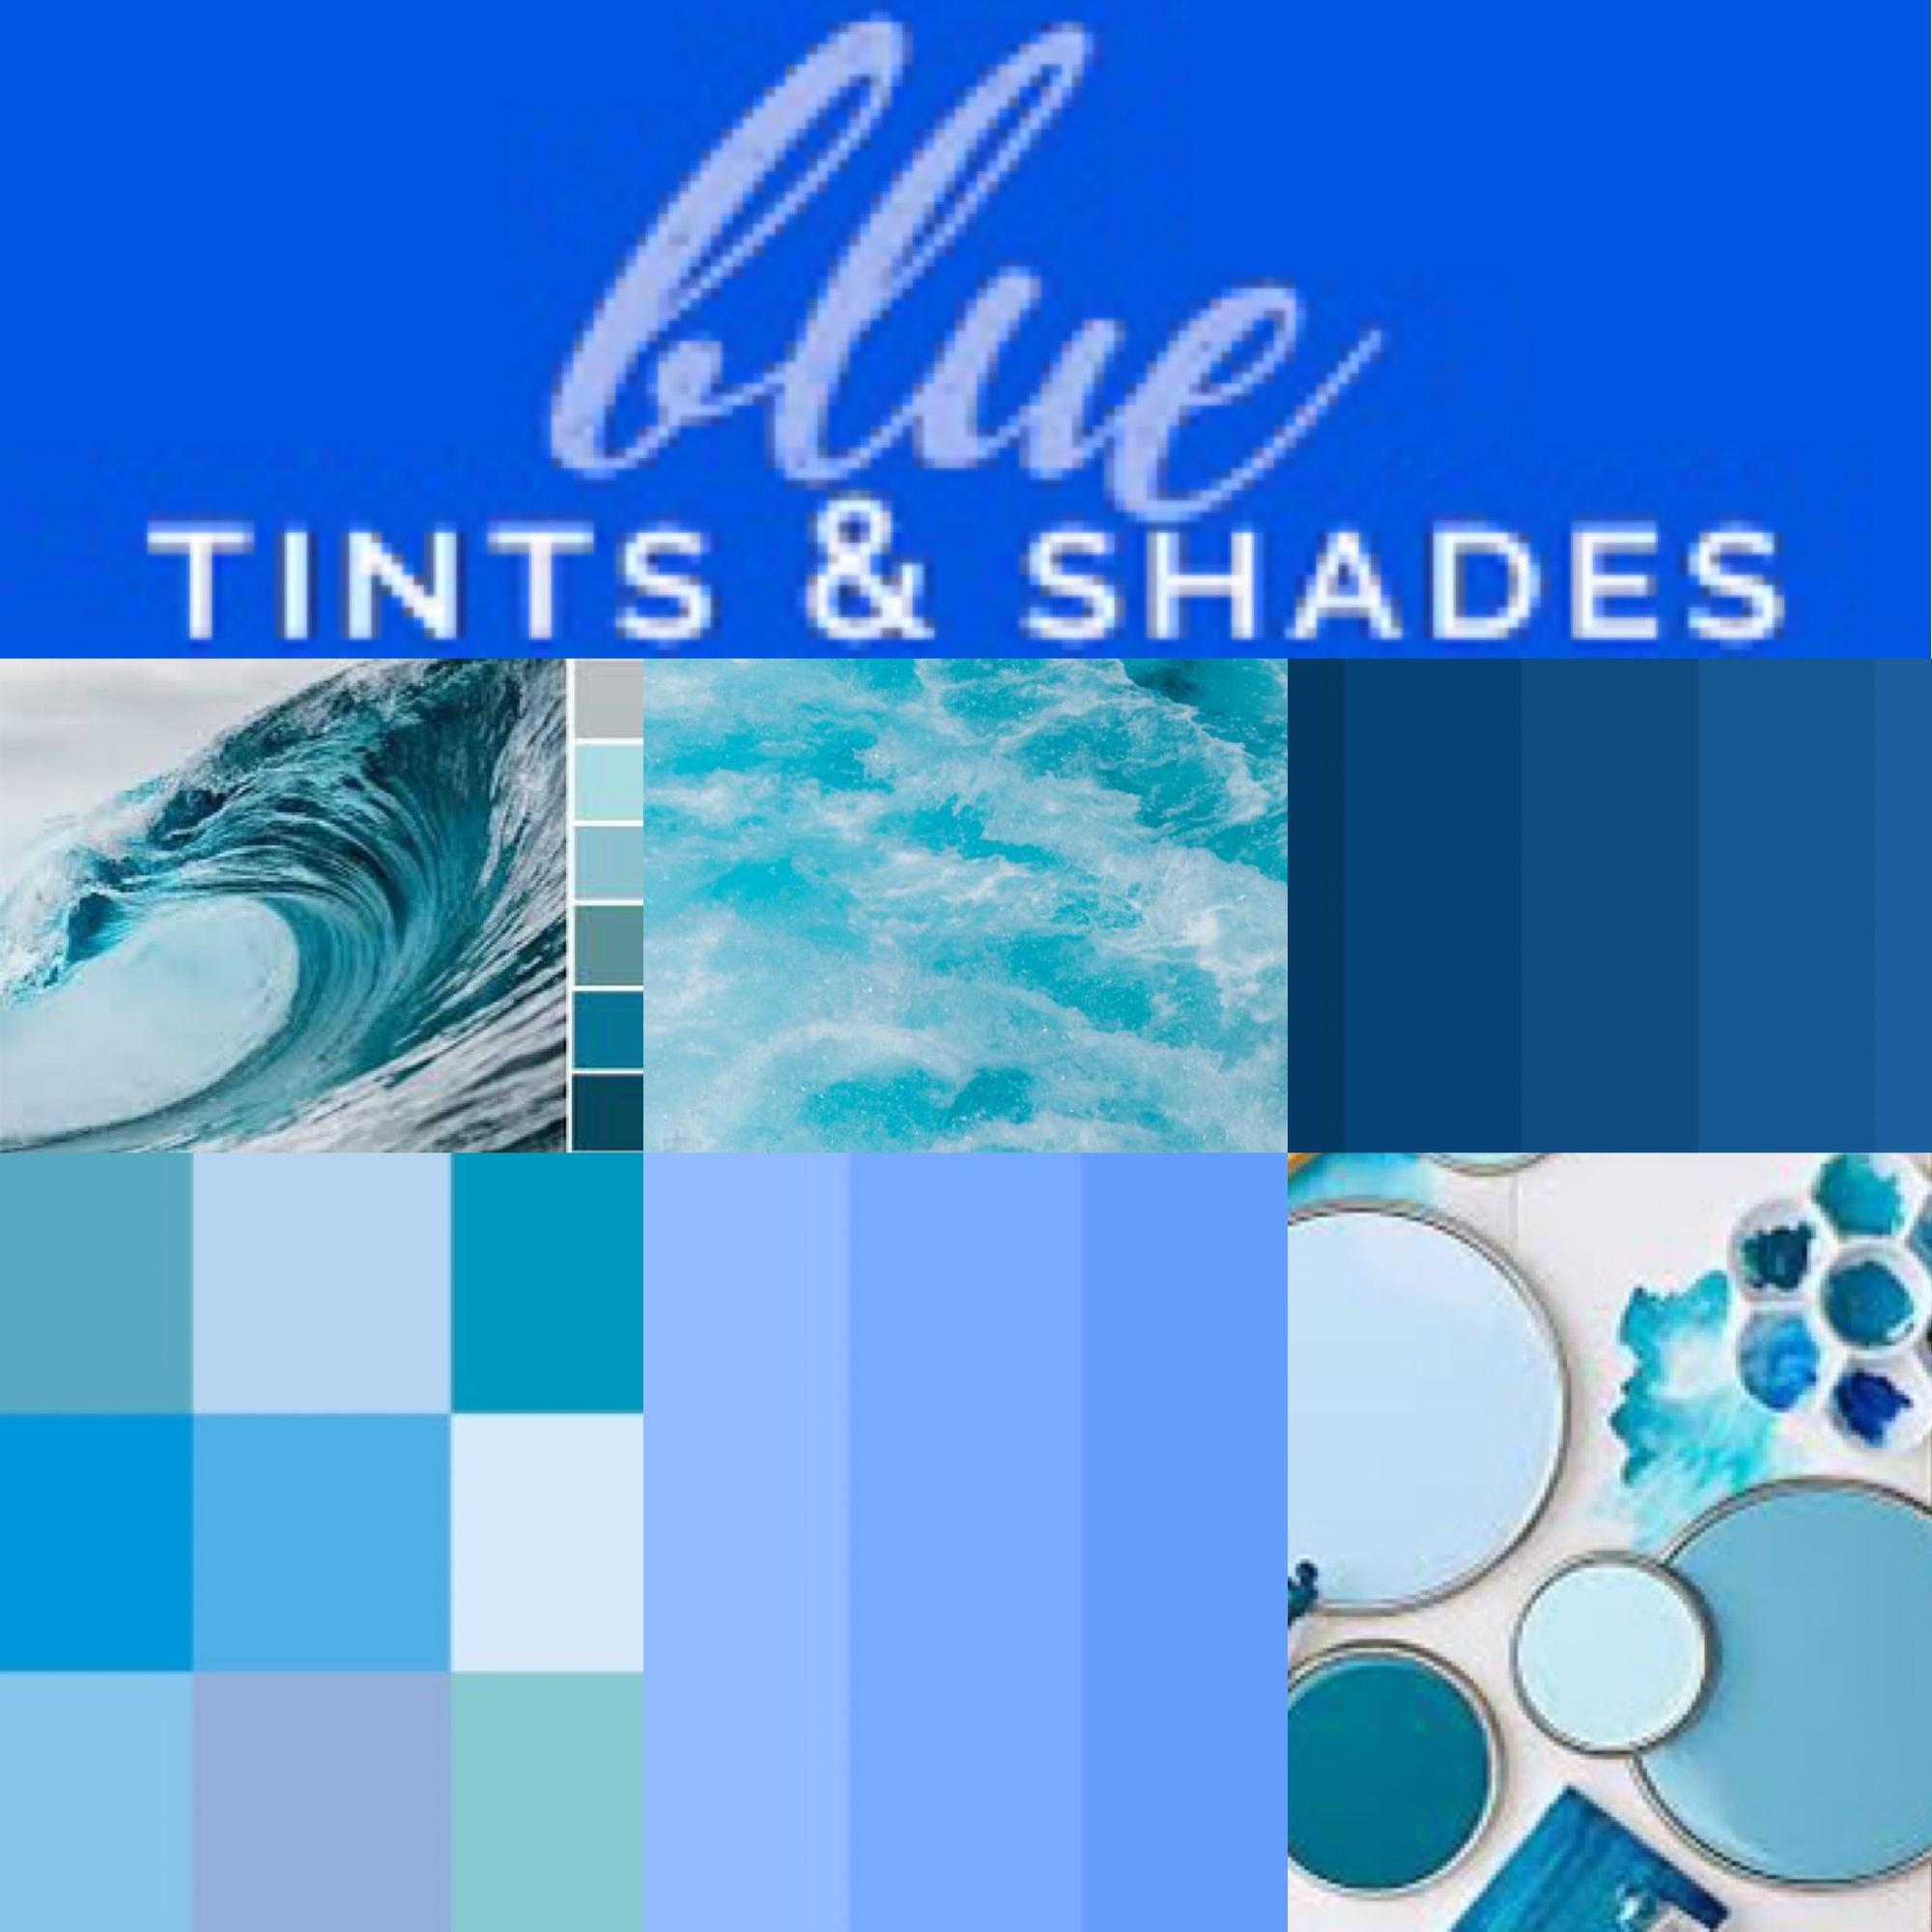 Our wedding color…all shades of water blue!